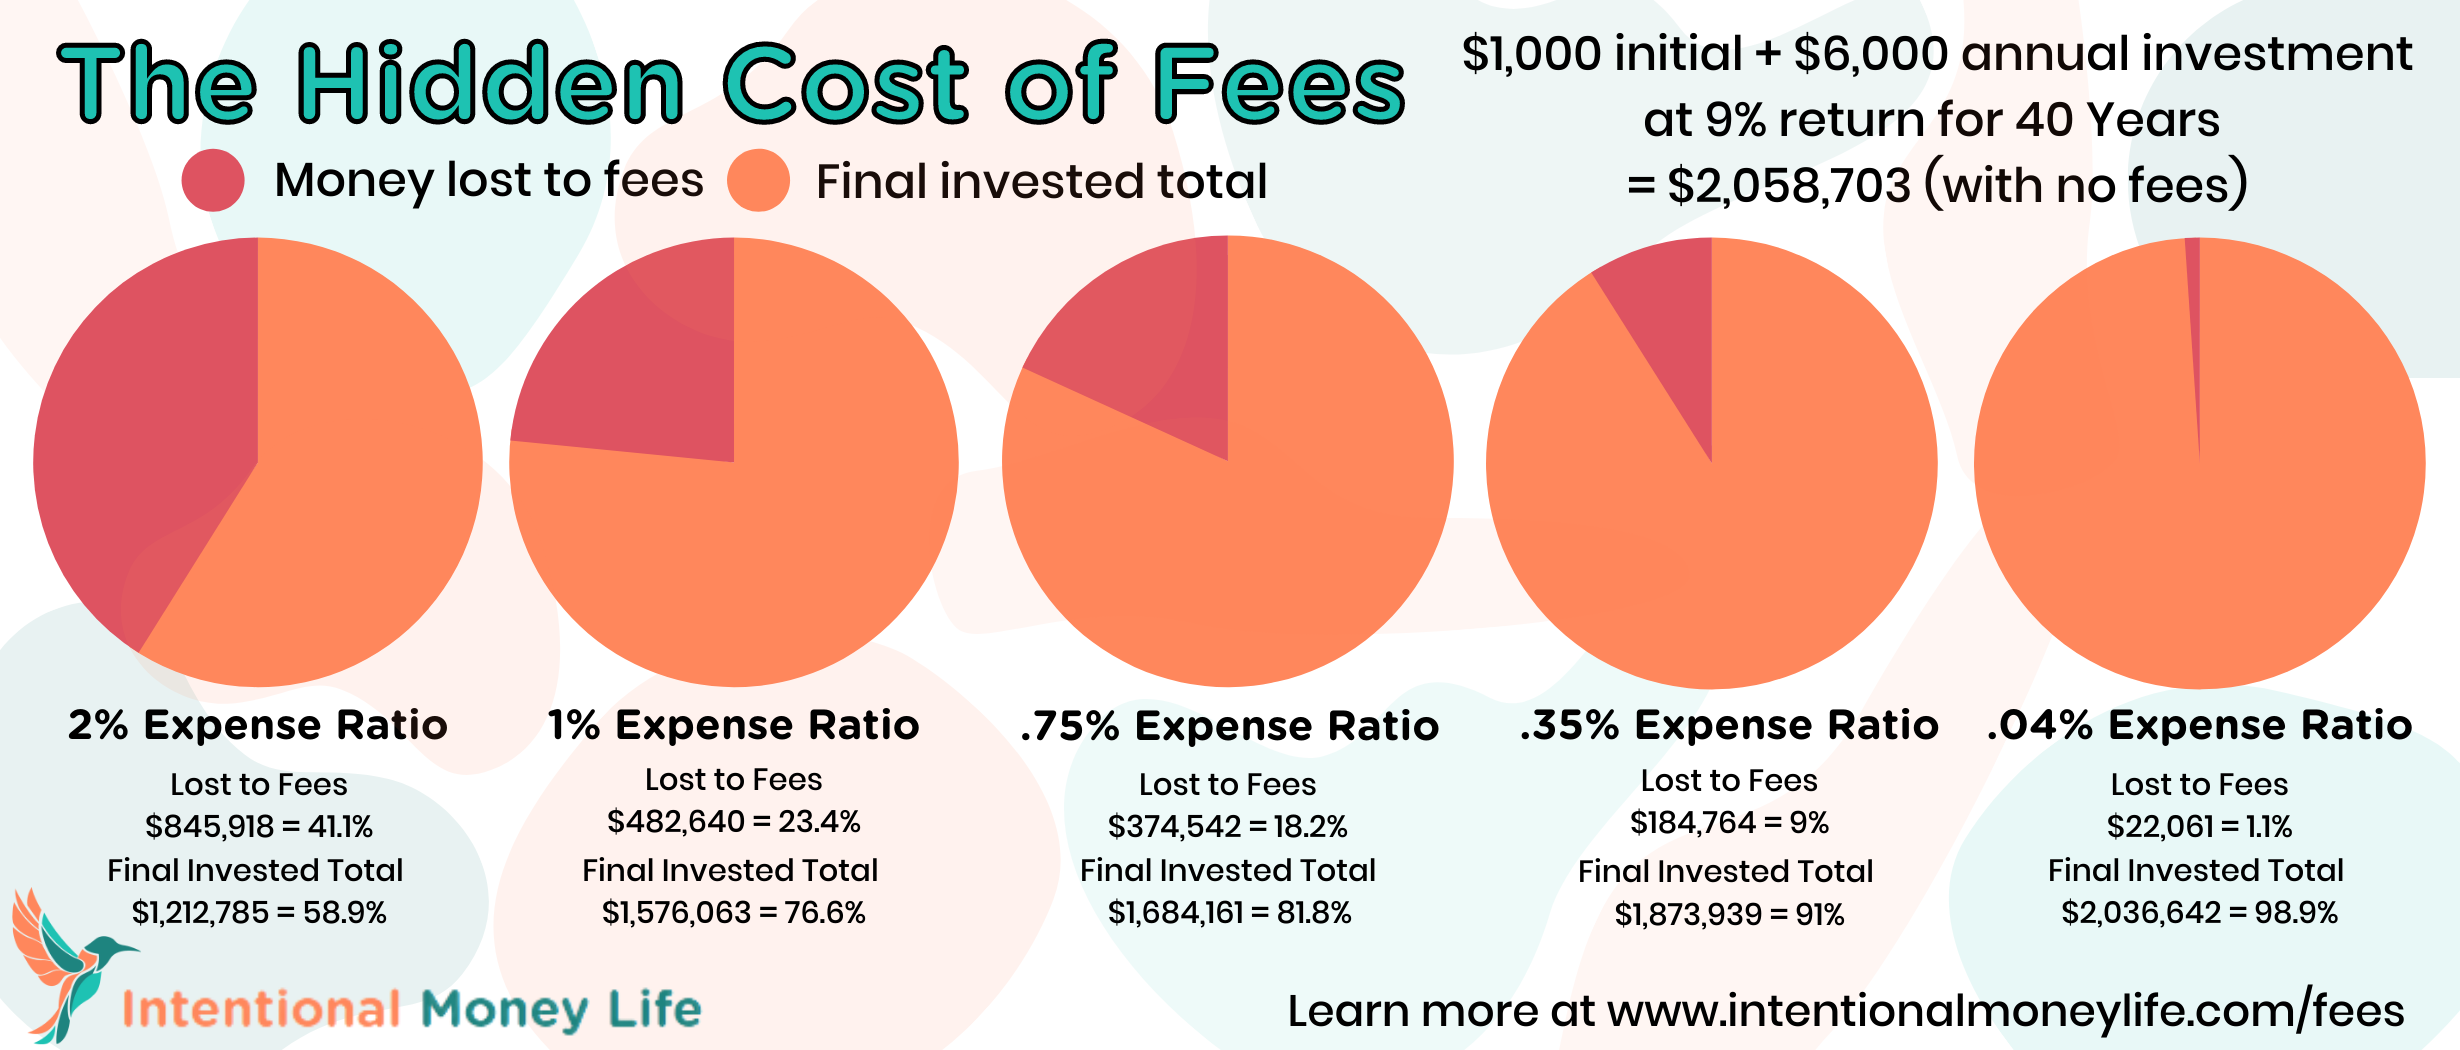 Blog - The Hidden Cost of Fees